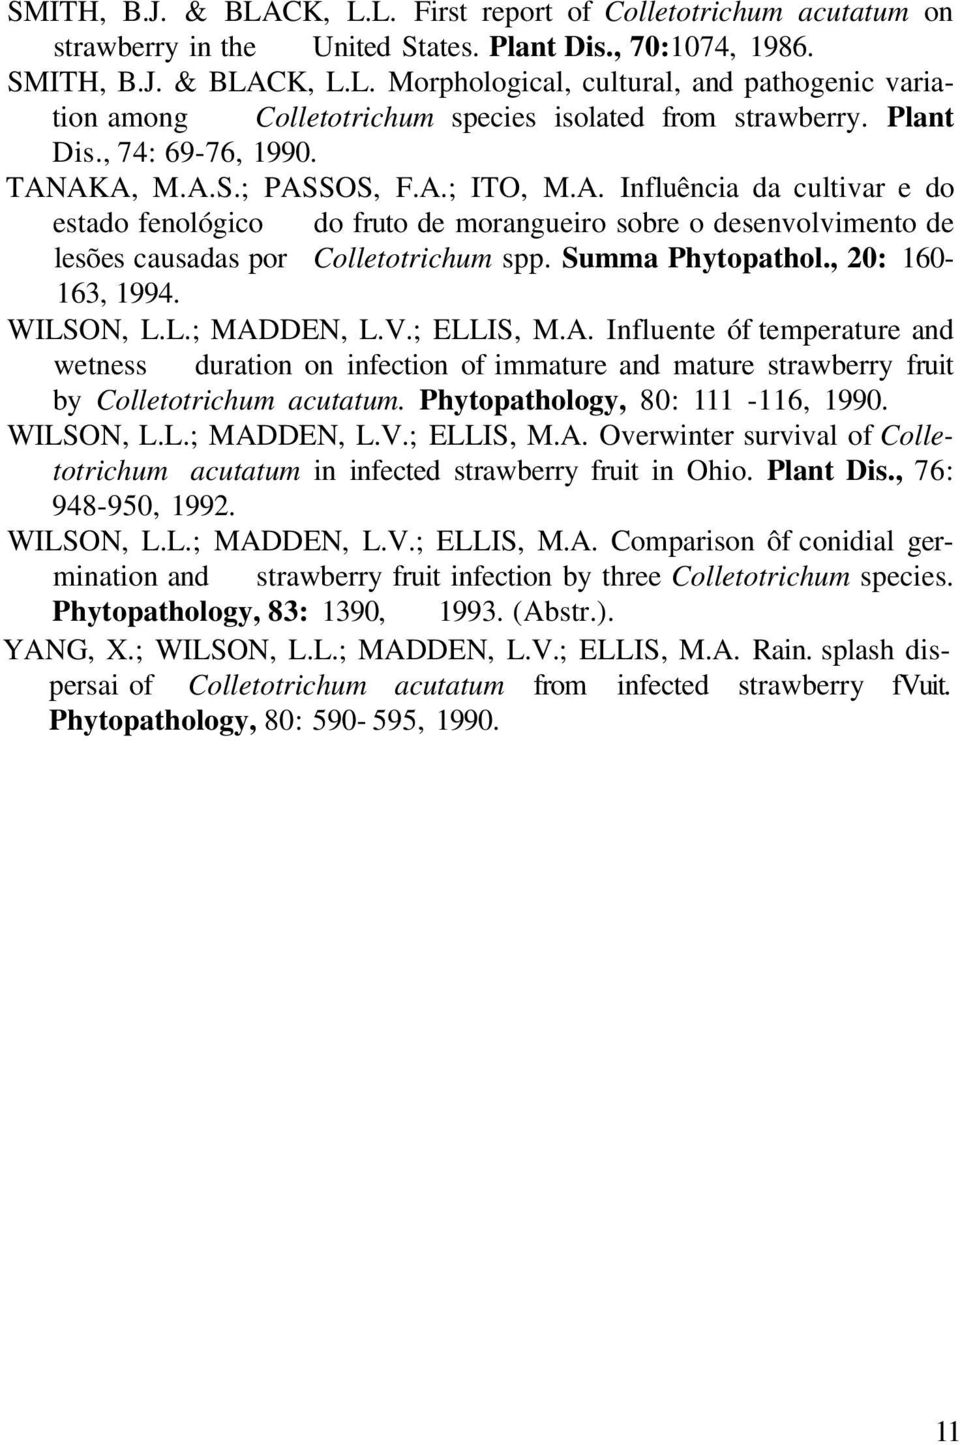 Summa Phytopathol., 20: 160-163, 1994. WILSON, L.L.; MADDEN, L.V.; ELLIS, M.A. Influente óf temperature and wetness duration on infection of immature and mature strawberry fruit by Colletotrichum acutatum.